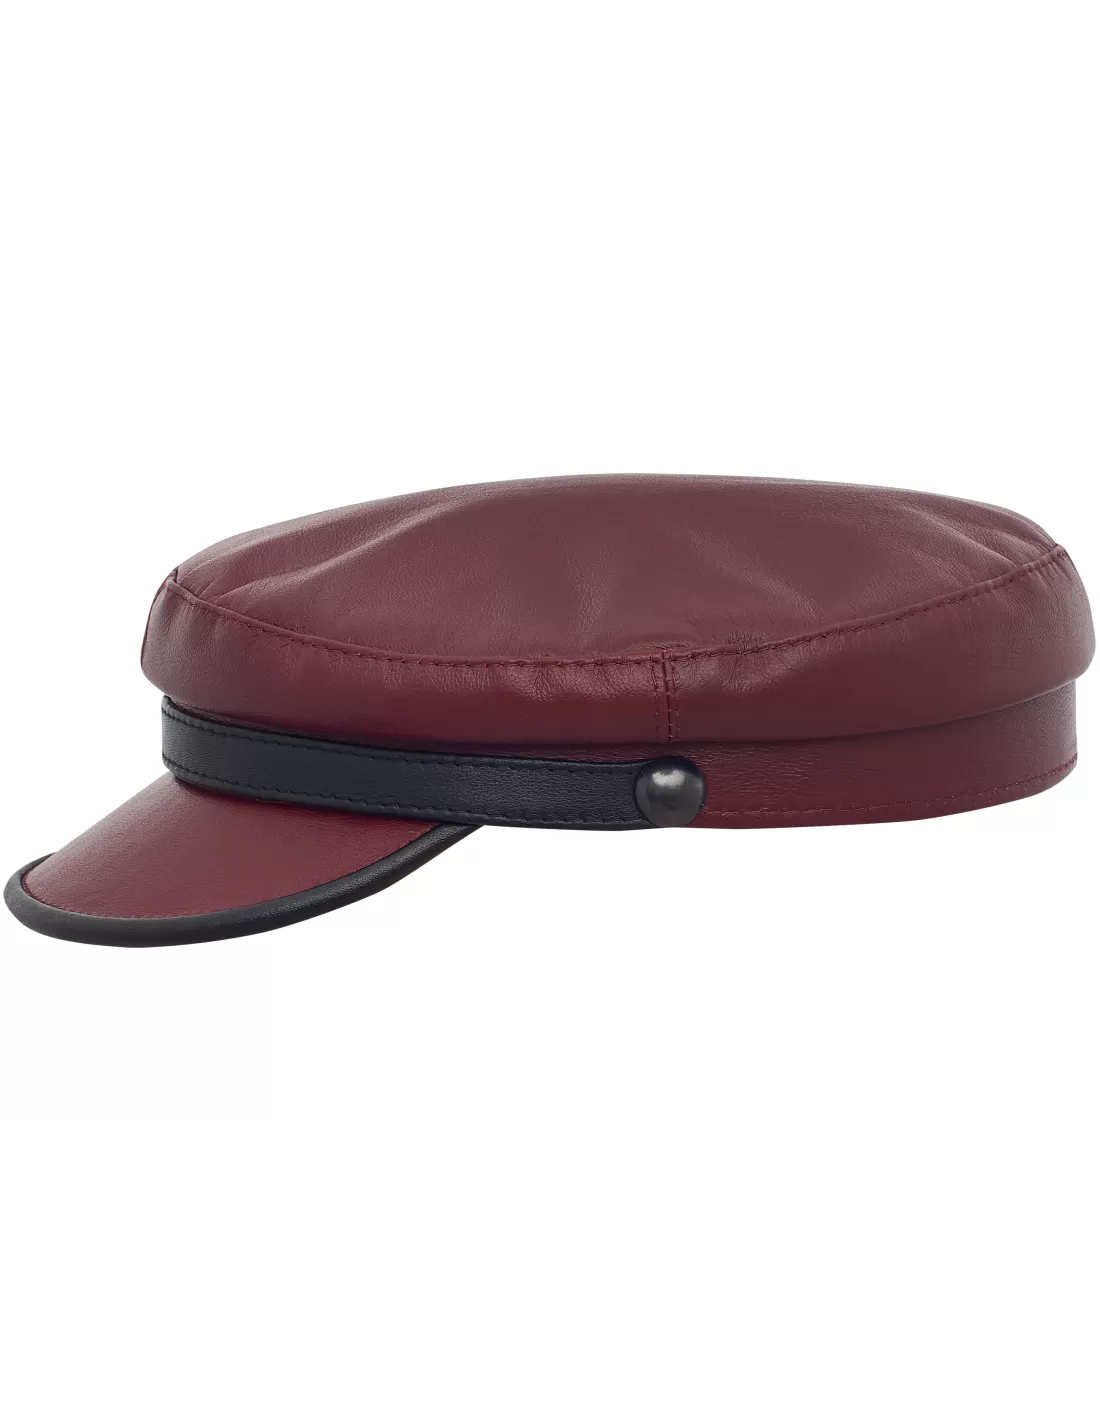 Caps - Trawler - Leather 62 cm Maroon Red